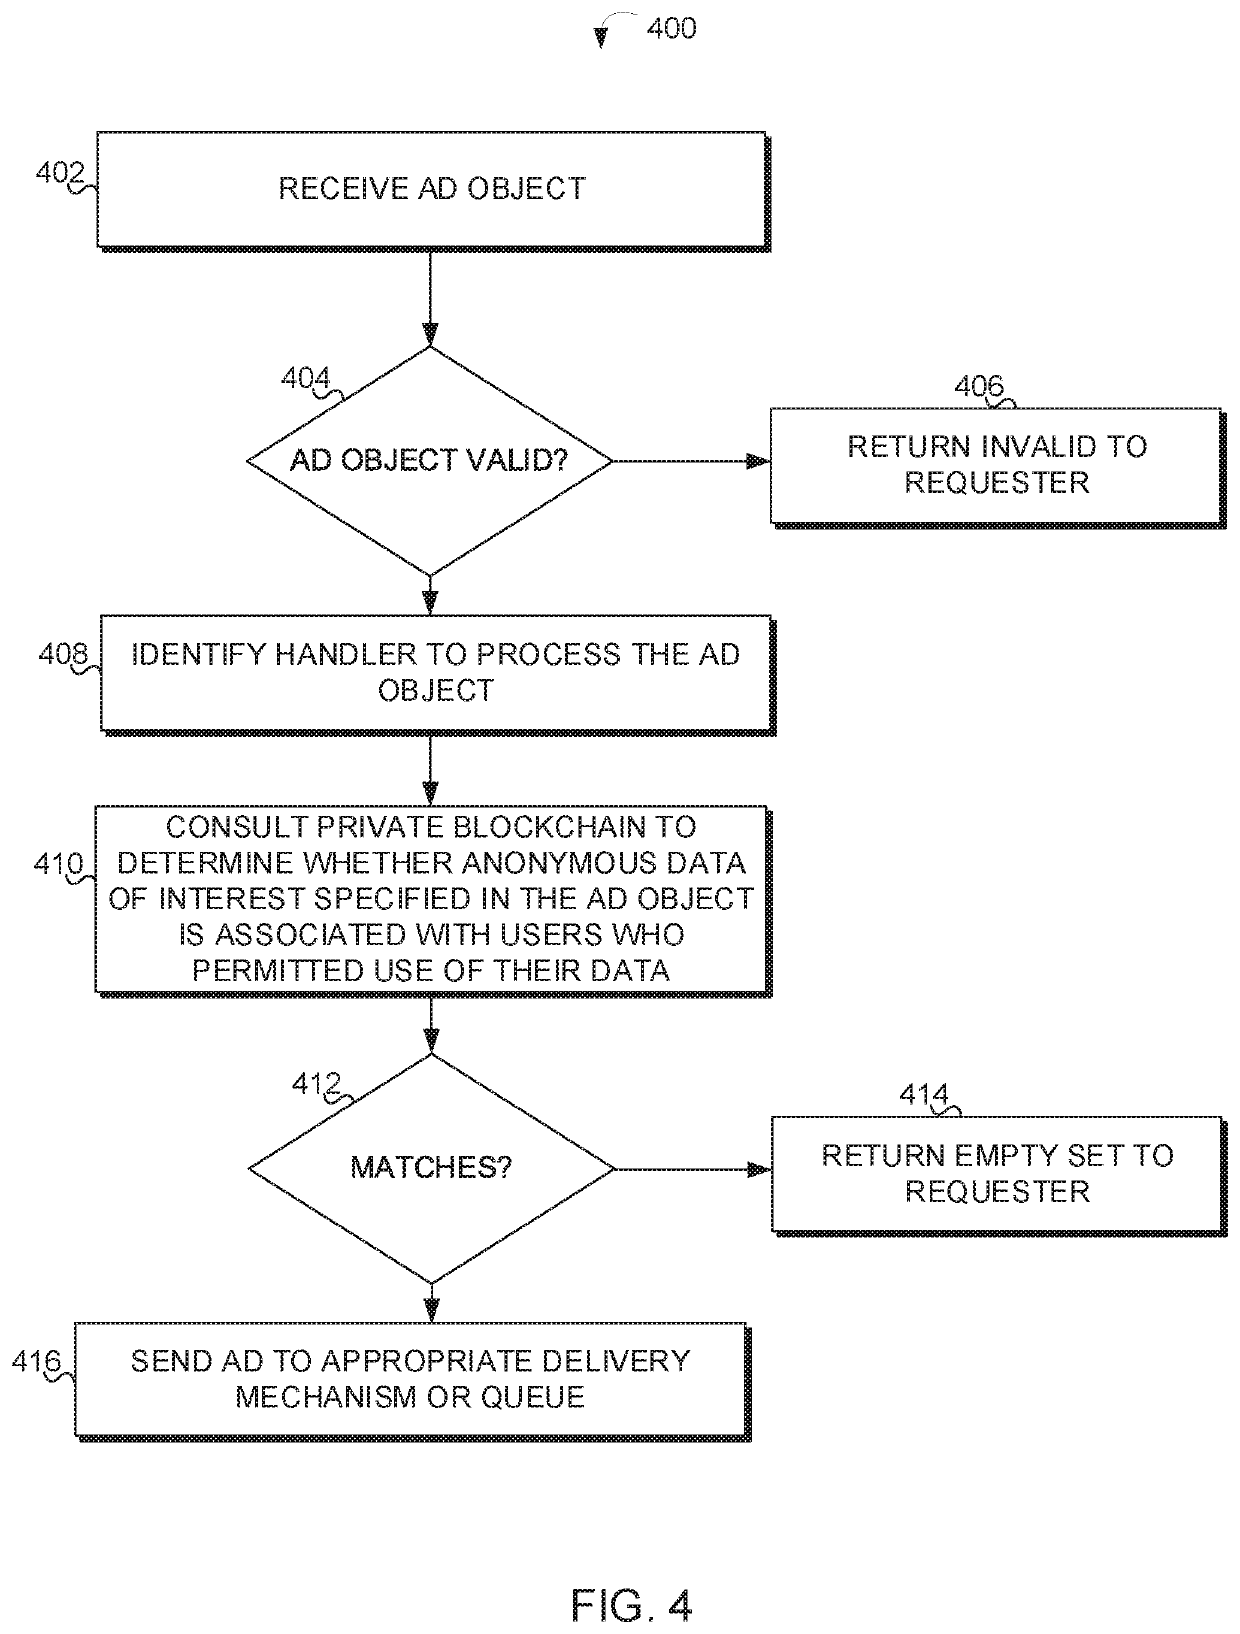 User control of anonymized profiling data using public and private blockchains in an electronic ad marketplace